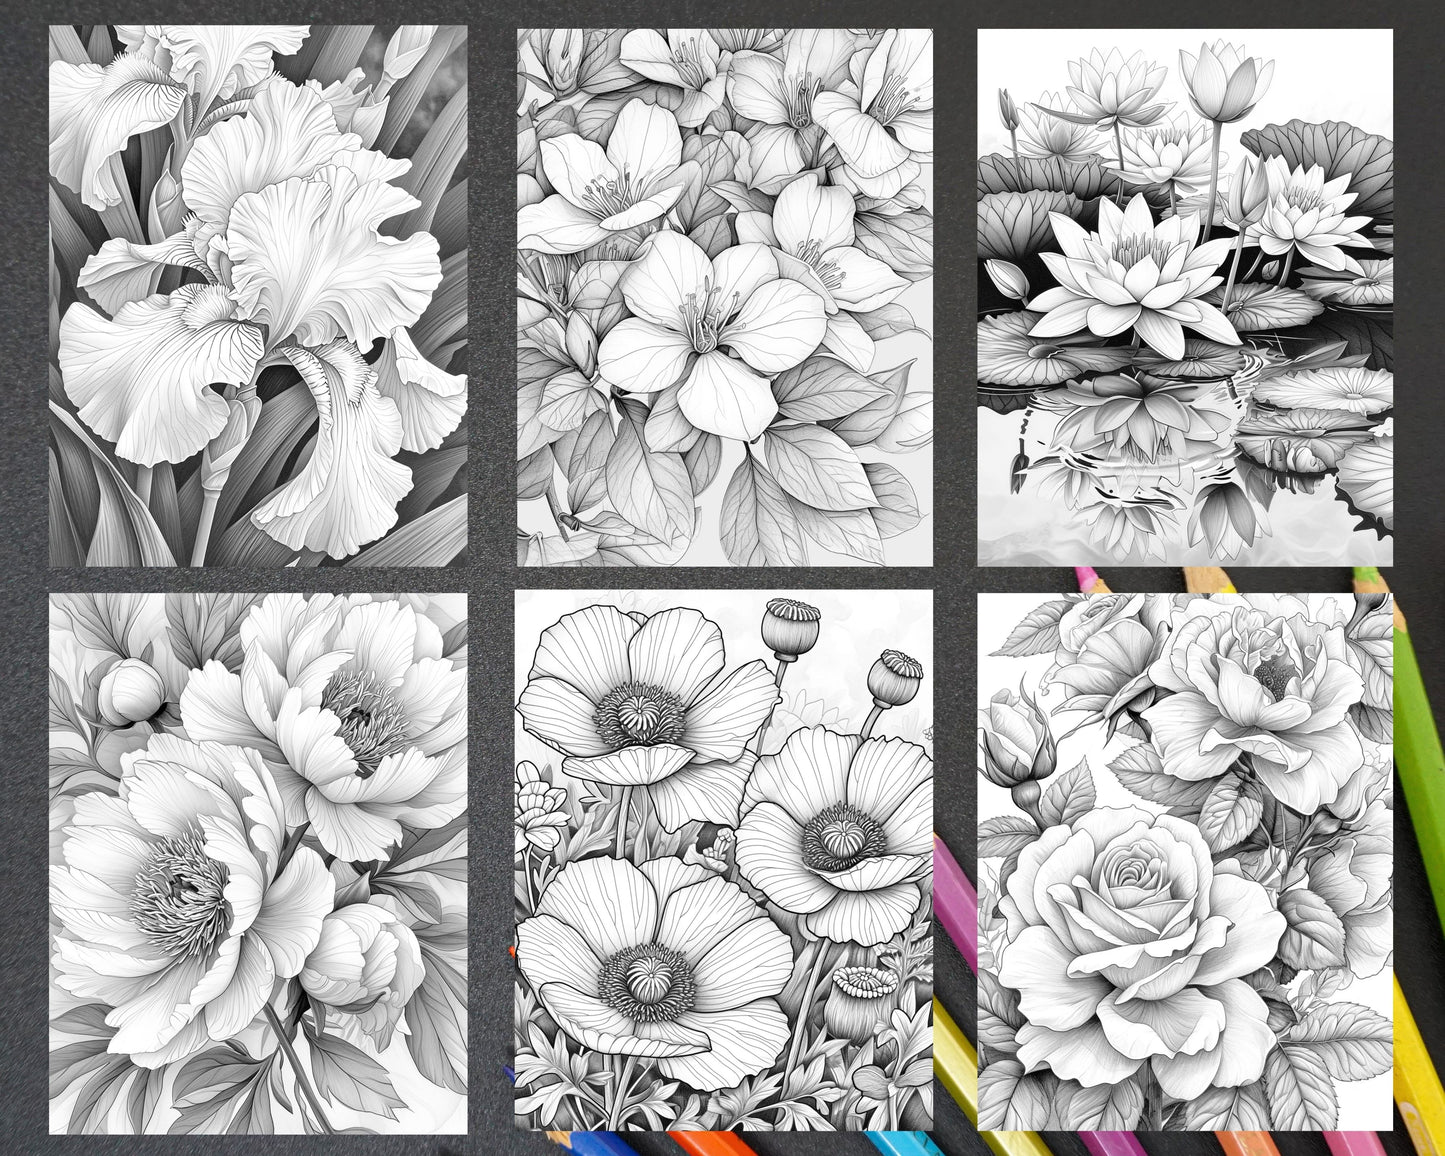 adult coloring pages, adult coloring sheets, adult coloring book pdf, adult coloring book printable, grayscale coloring pages, grayscale coloring books, flower coloring pages for adults, flower coloring book, spring coloring pages for adults, grayscale illustration, spring coloring book